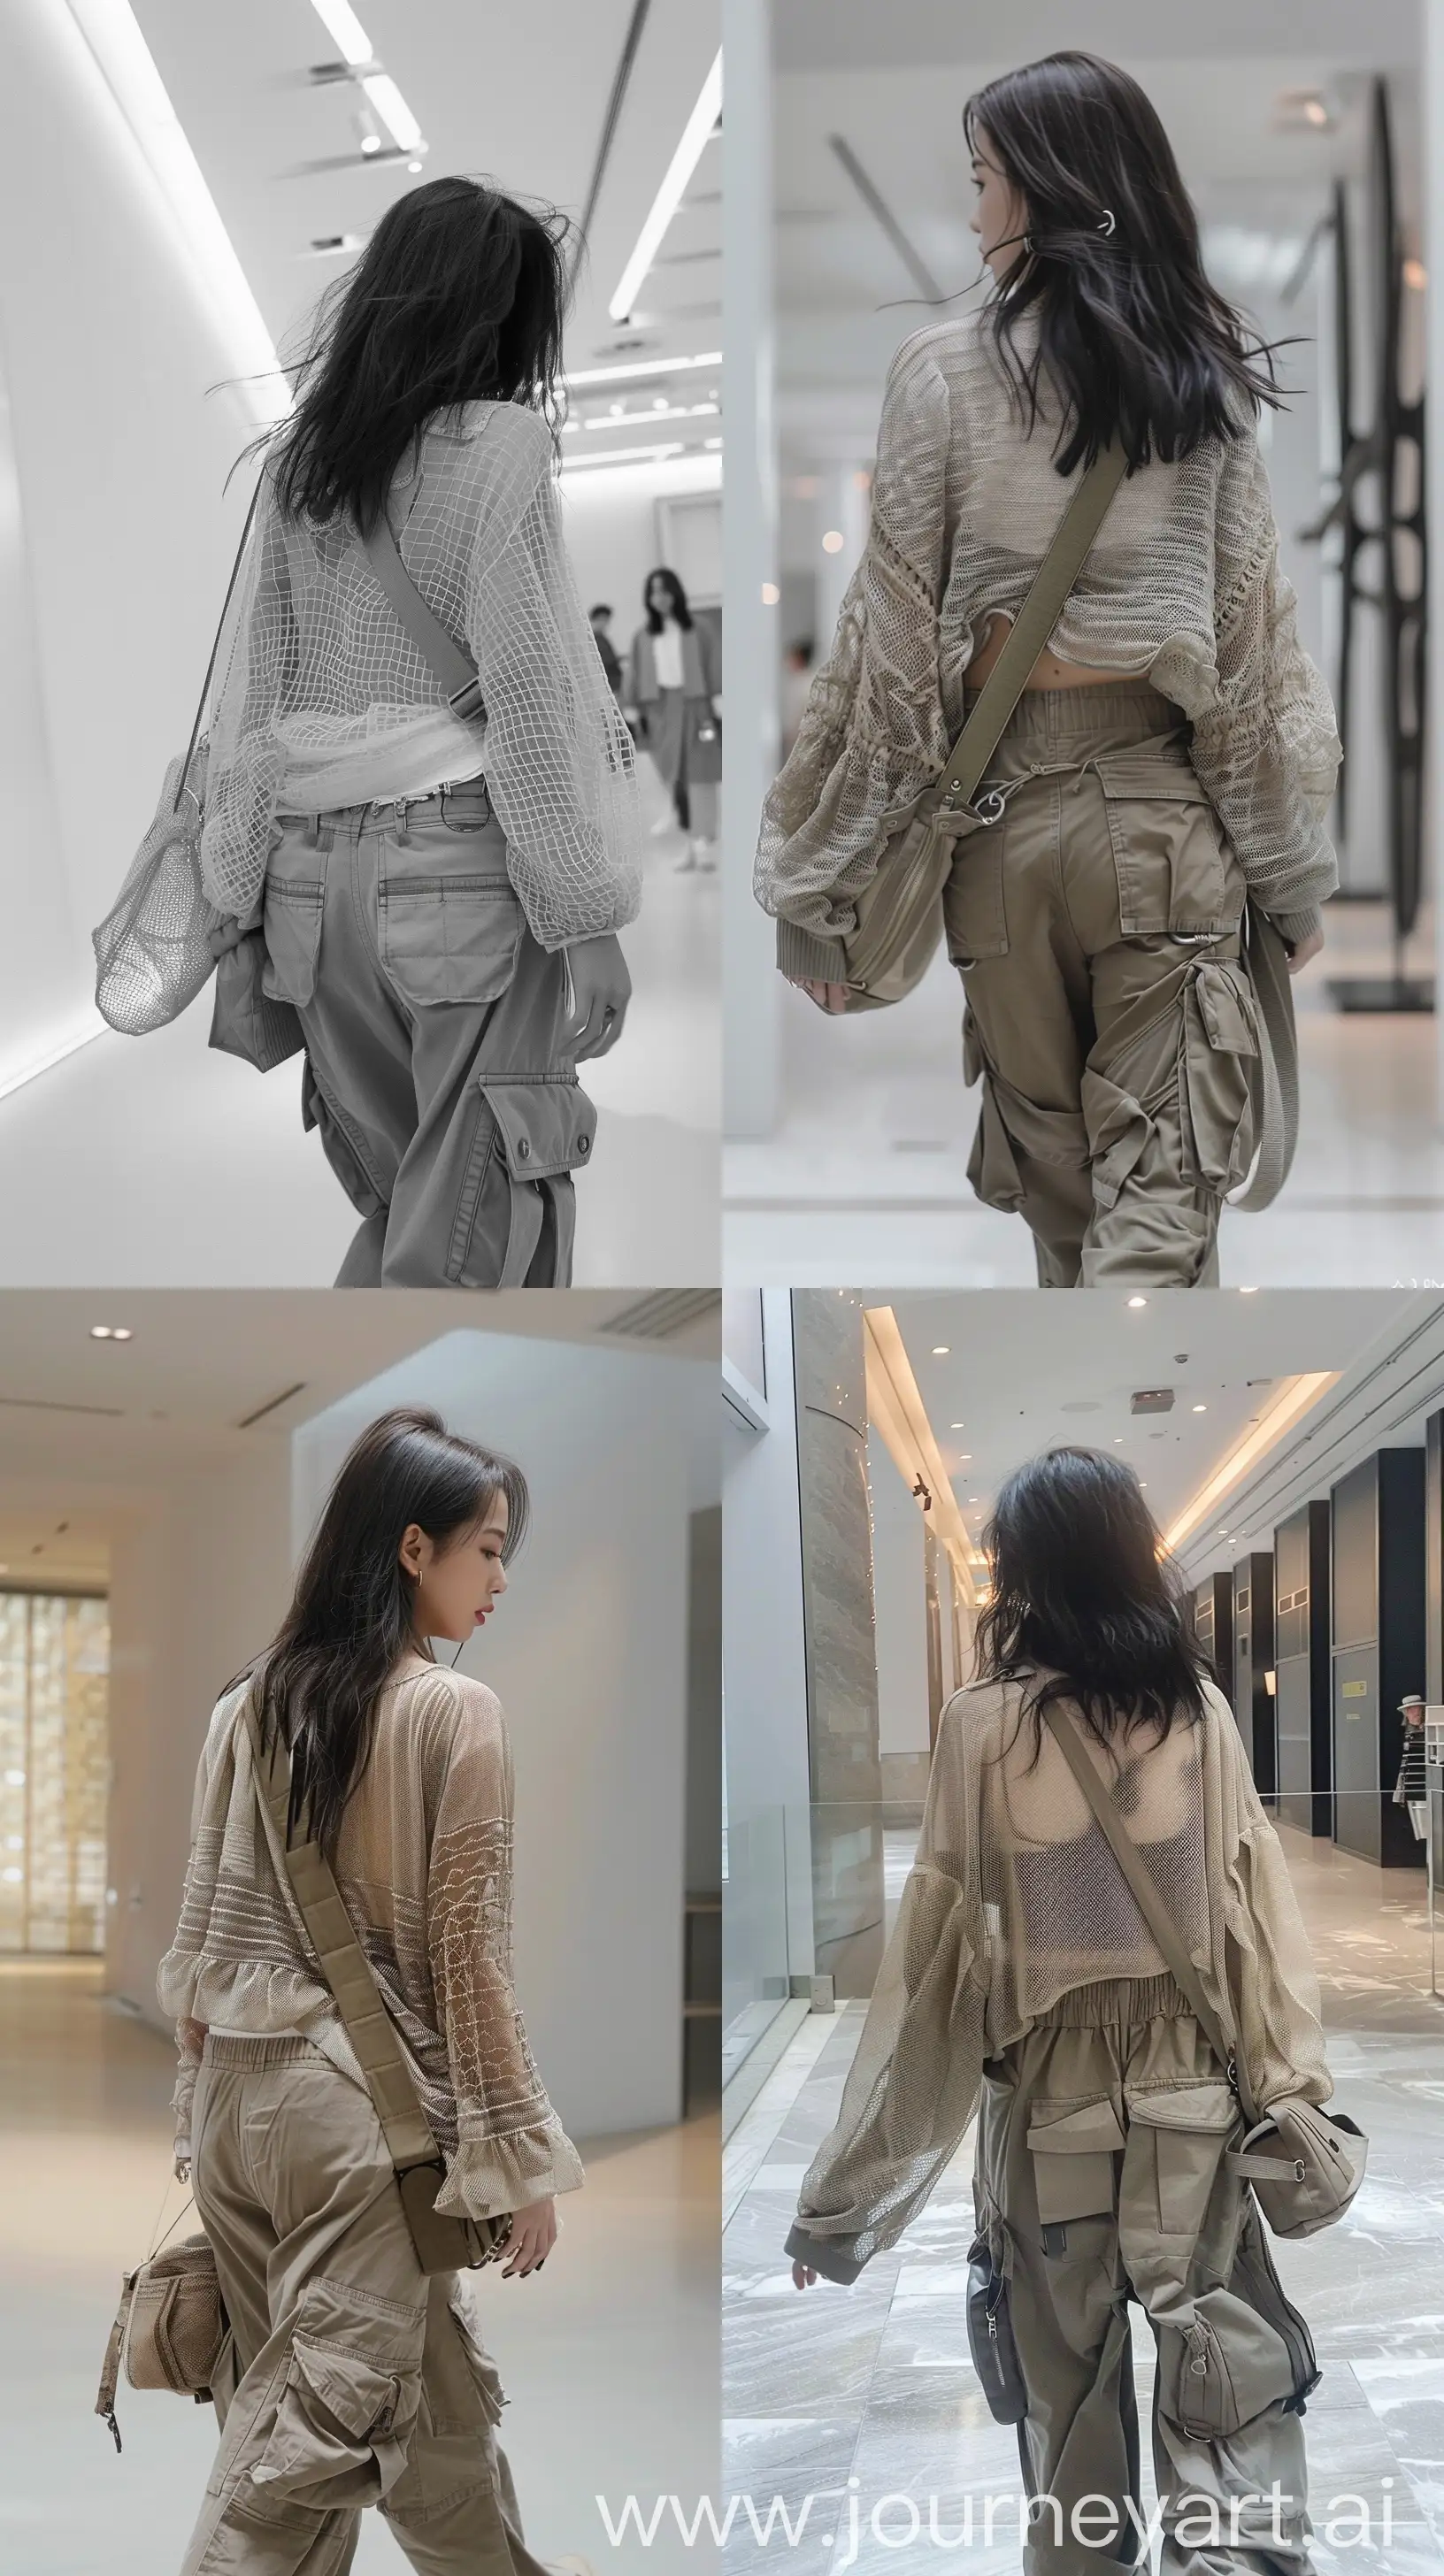 Fashionable-SelfPortrait-of-Jennie-from-Blackpink-with-Net-Cardigan-and-Oversized-Cargo-Pants